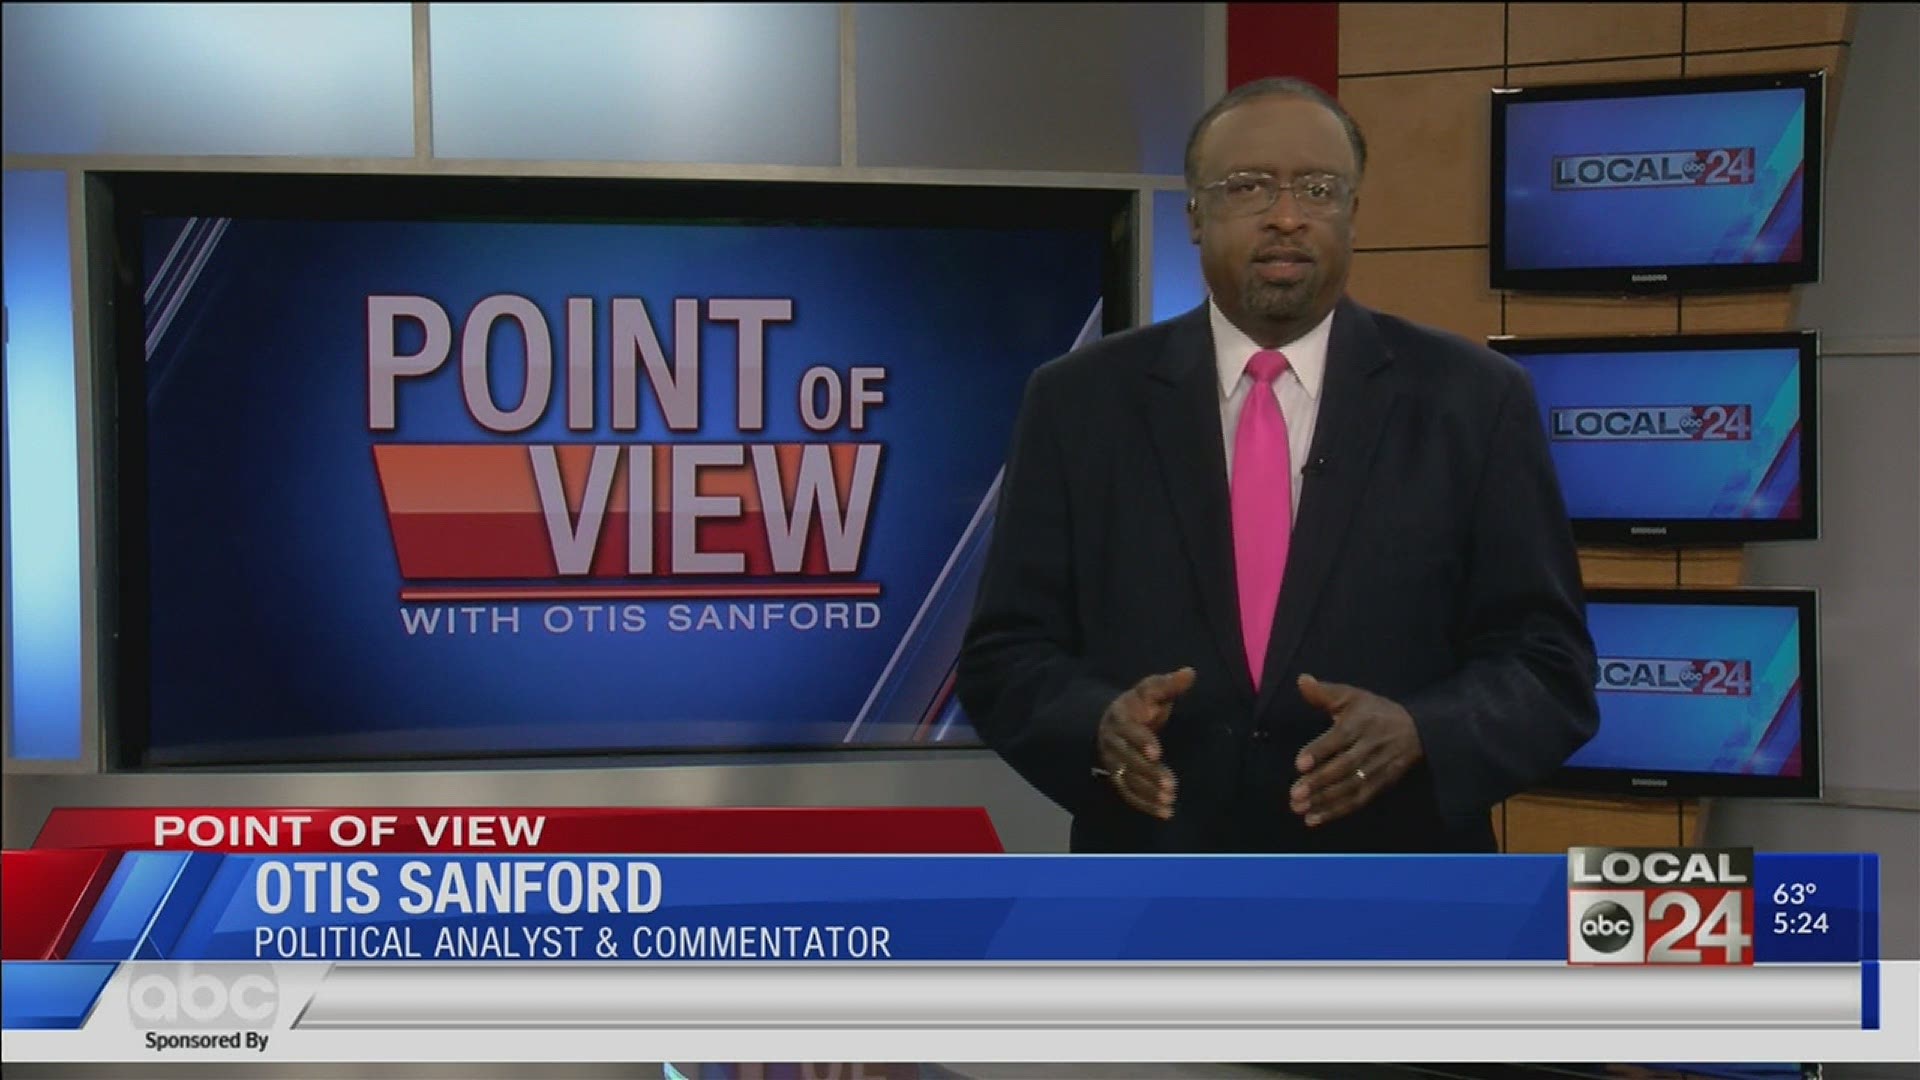 Local 24 News political analyst and commentator Otis Sanford shares his point of view on a local news outlet being left off the city of Memphis contact list.